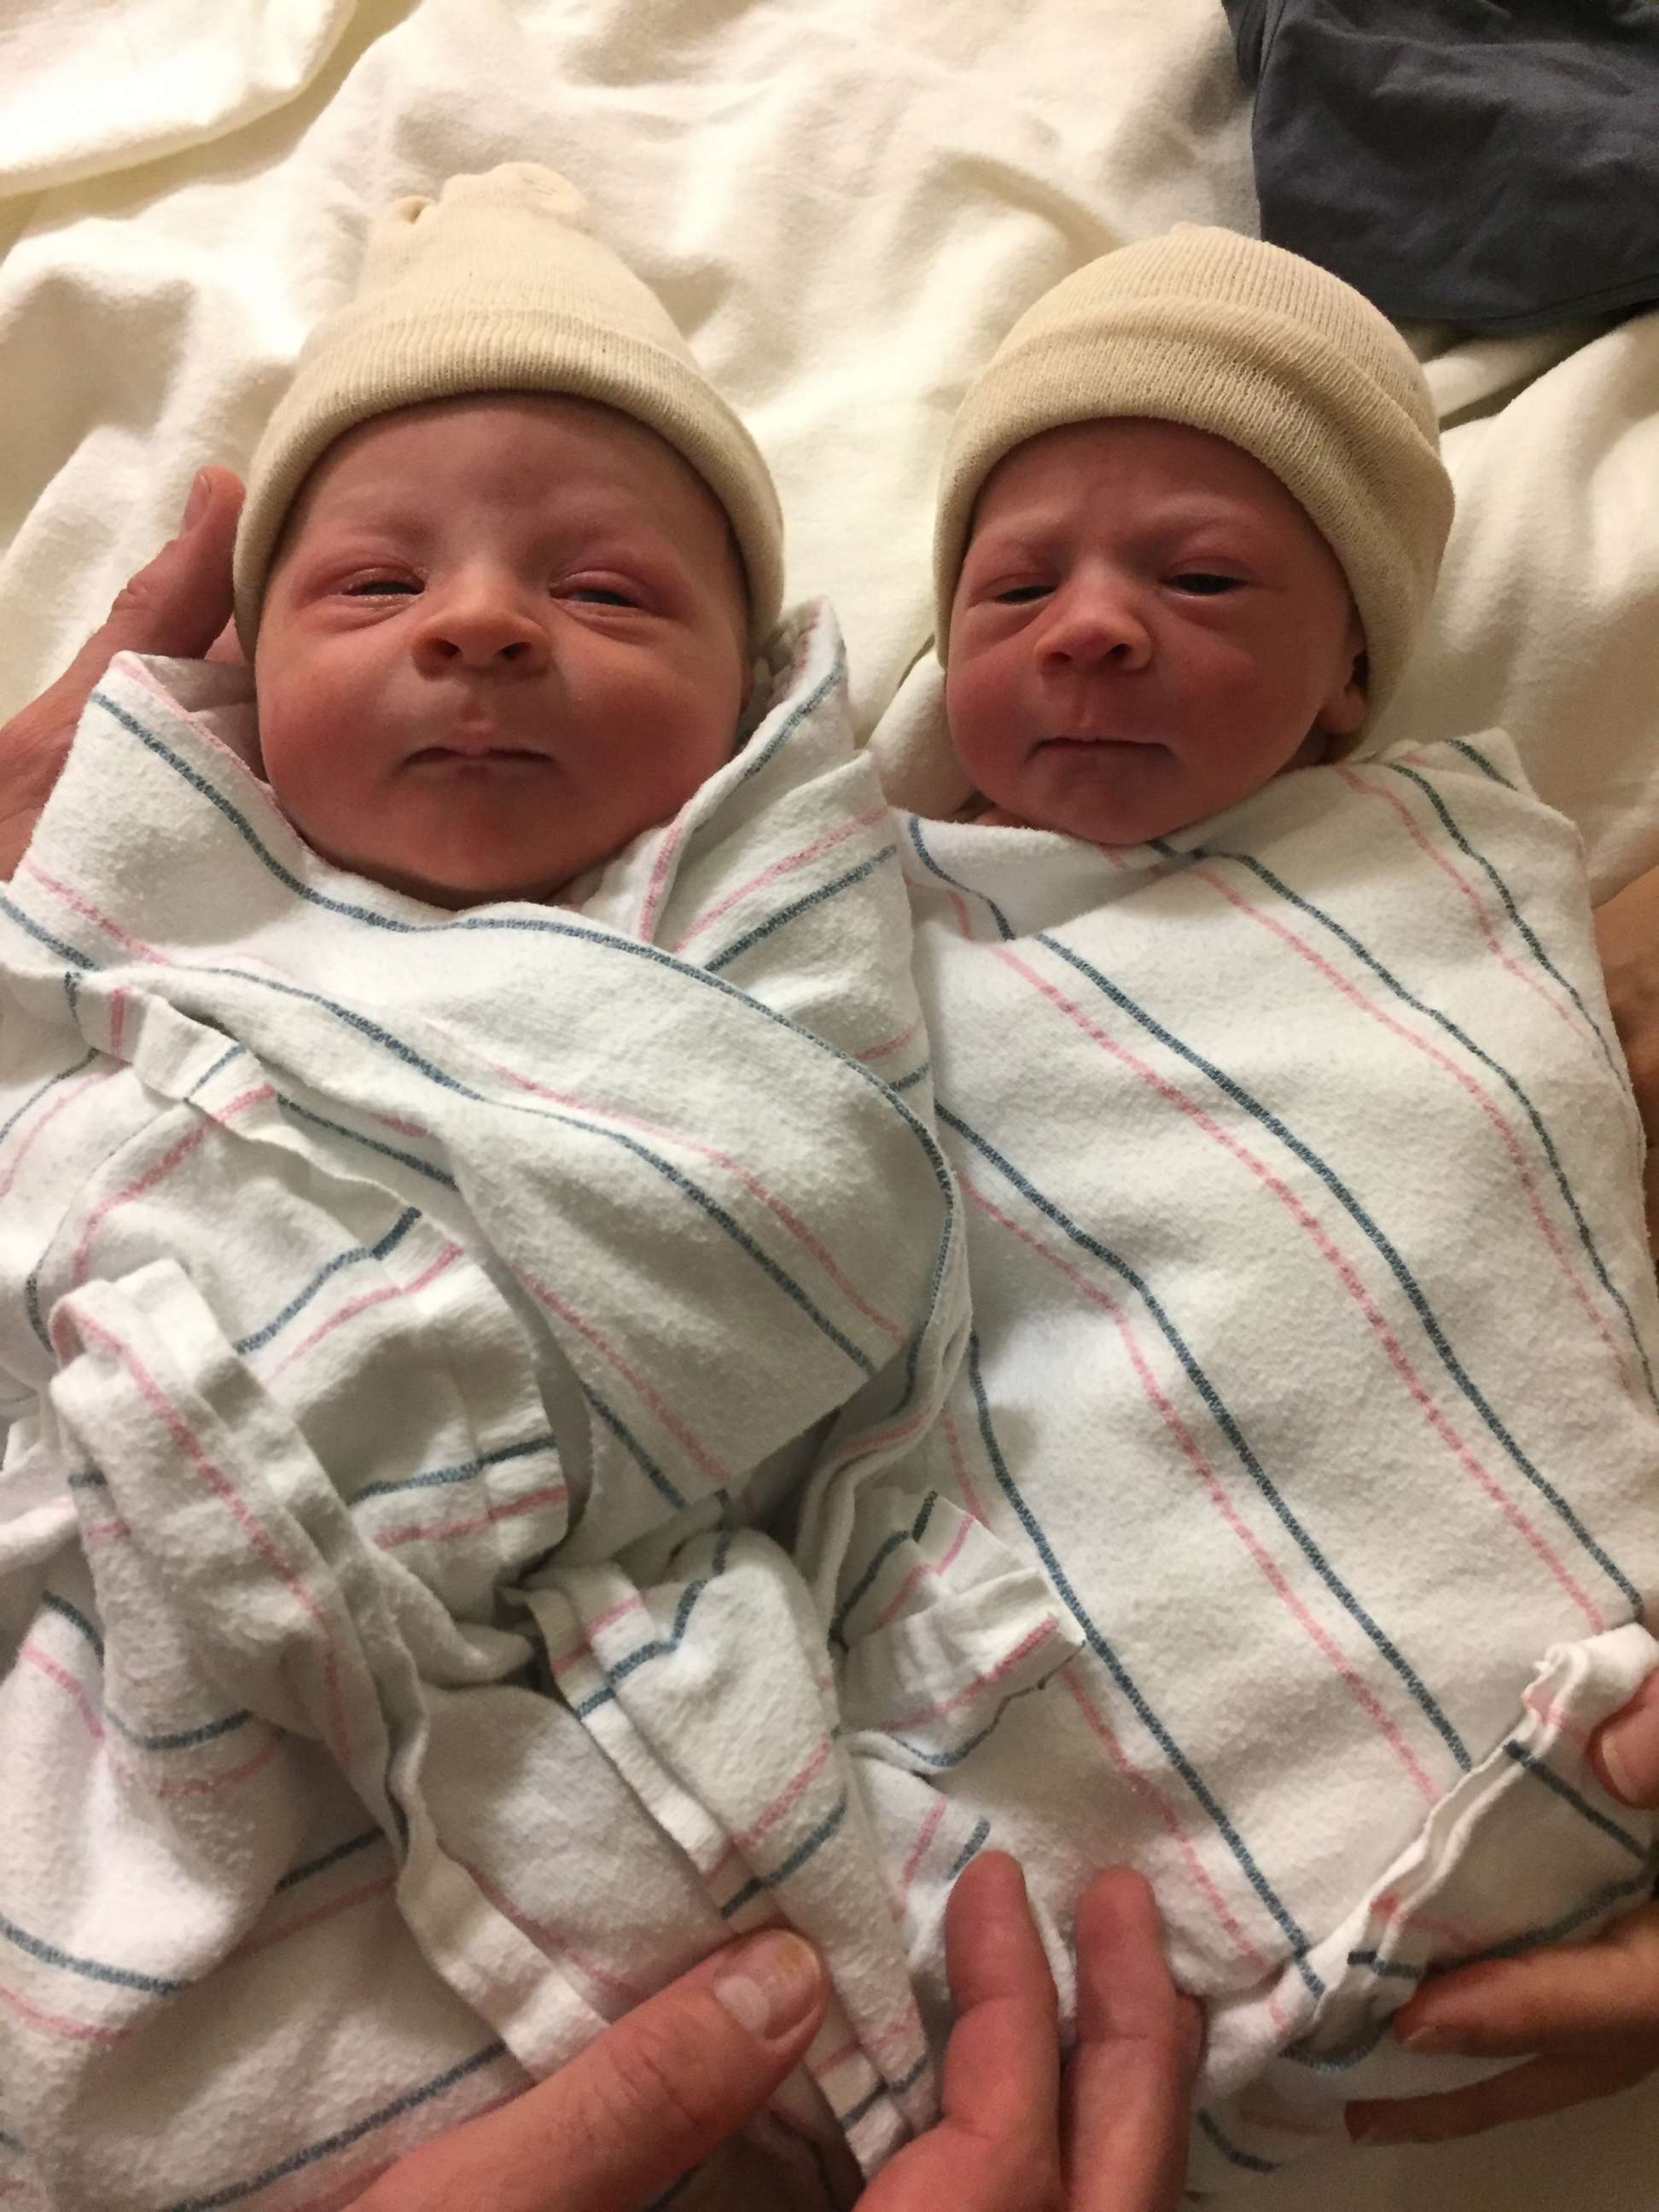 PHOTO: William Charles Bubenicek (left) was born on Aug. 15, weighing 7 pounds, 11 ounces in the room next door to his cousin, Andi Isabella Pistone, who was born on Aug. 16, weighing 7 pounds even, 20 hours later.